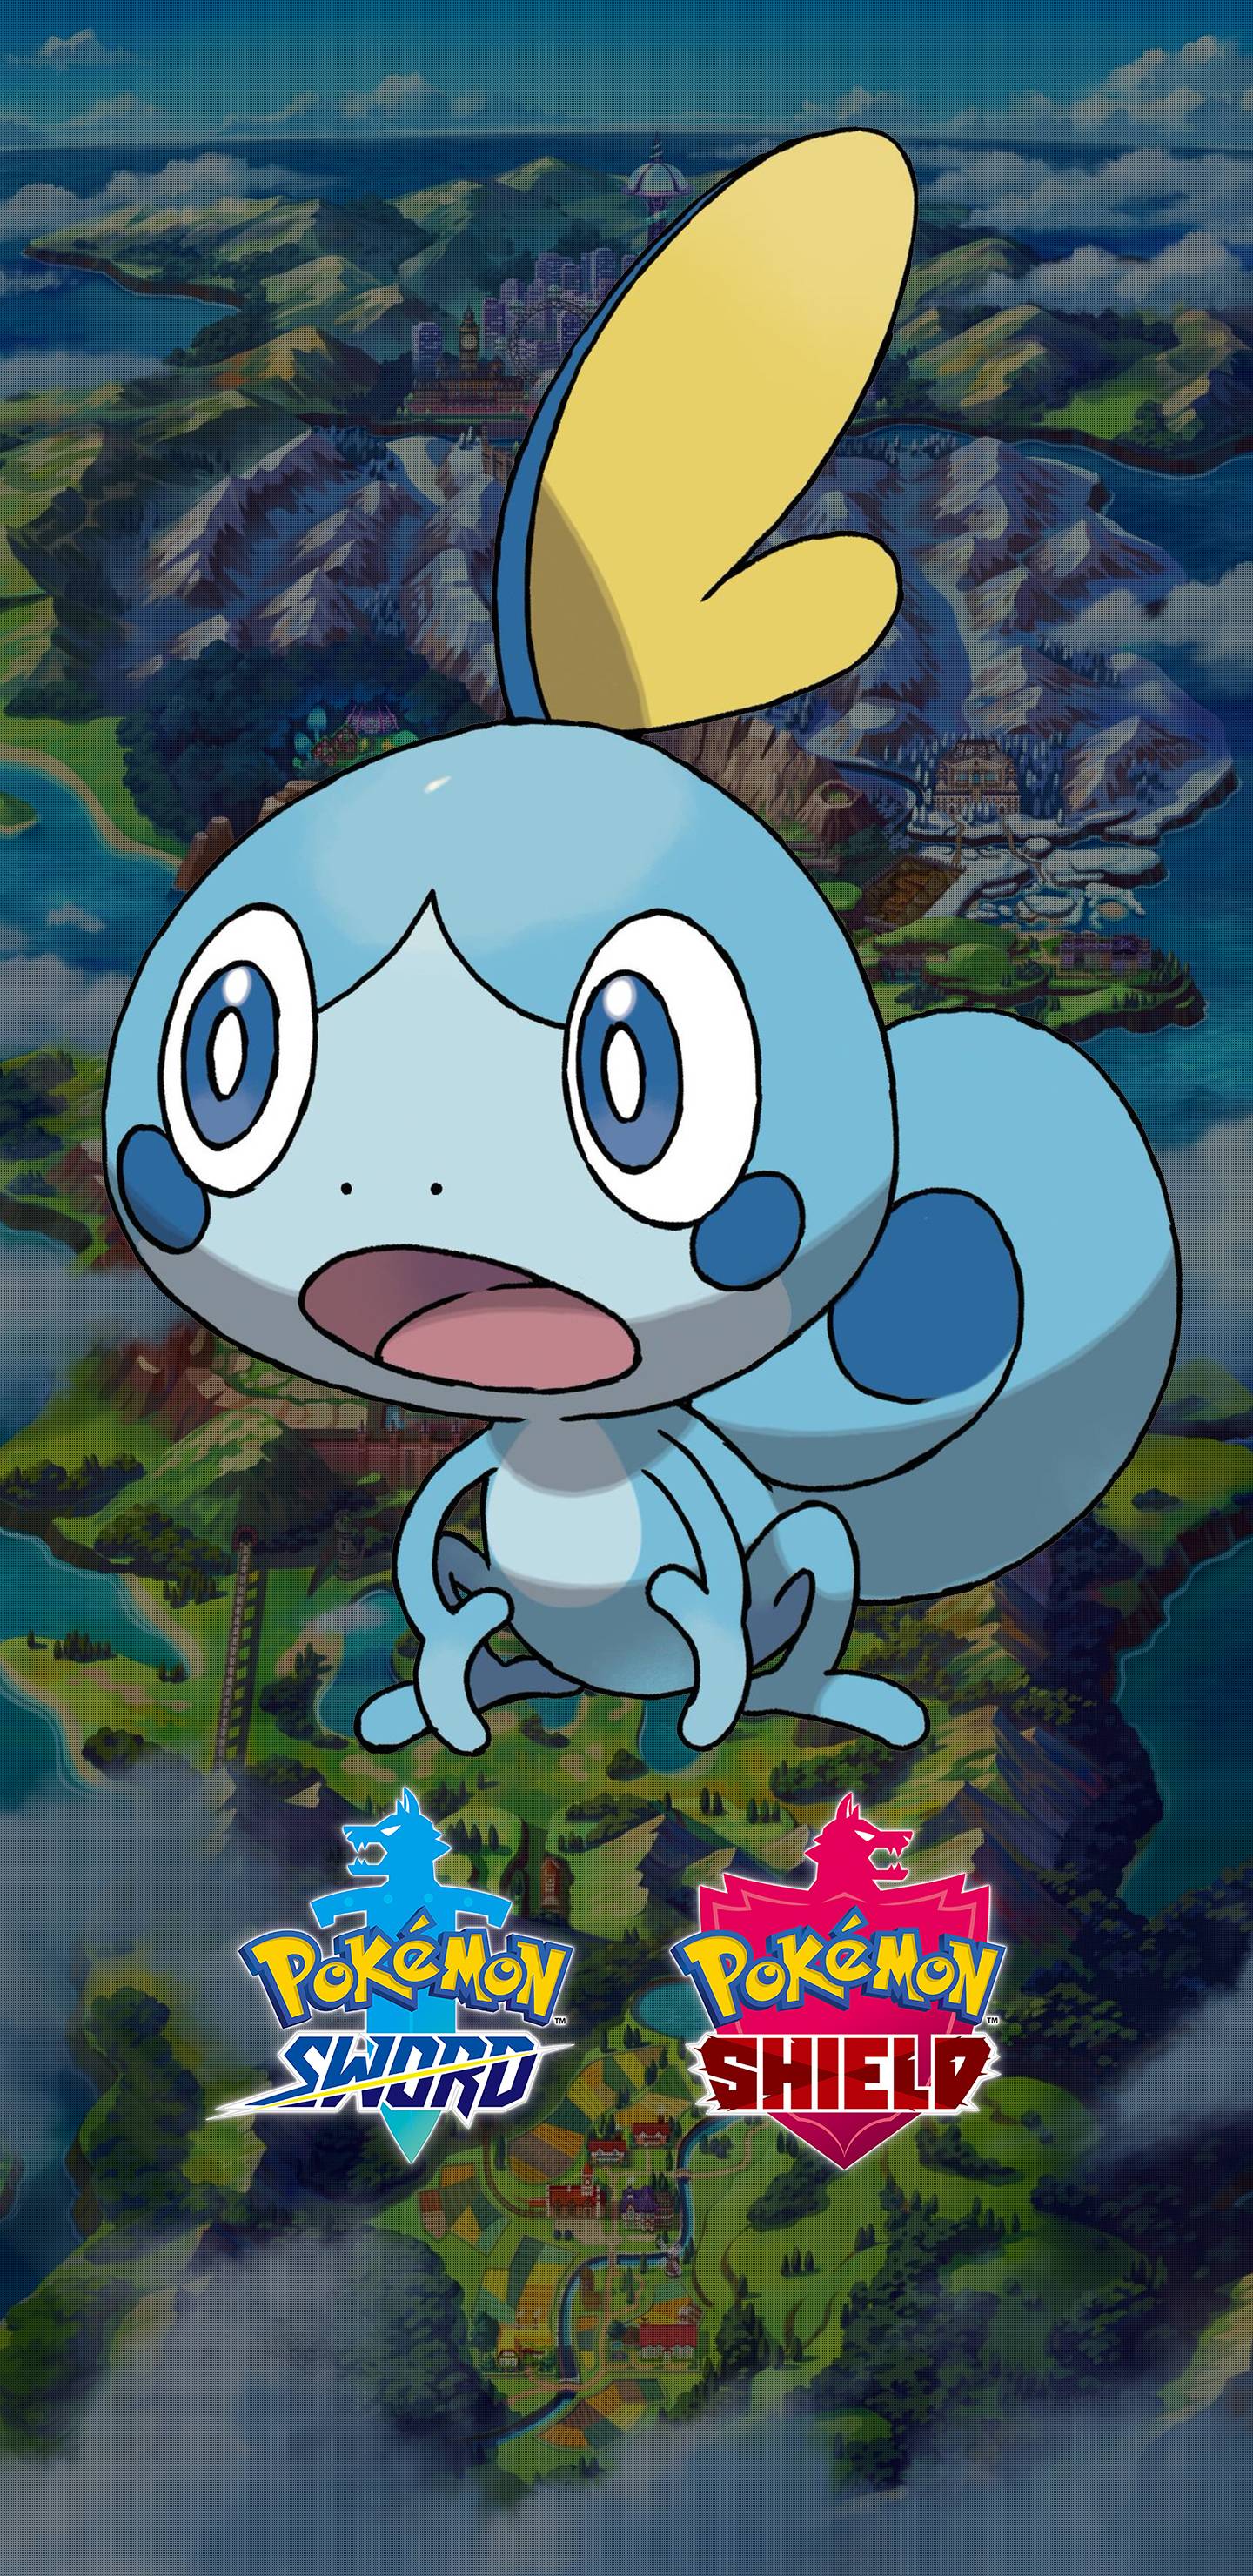 Pokemon Sword and Shield Sobble Wallpaper. Cat with Monocle